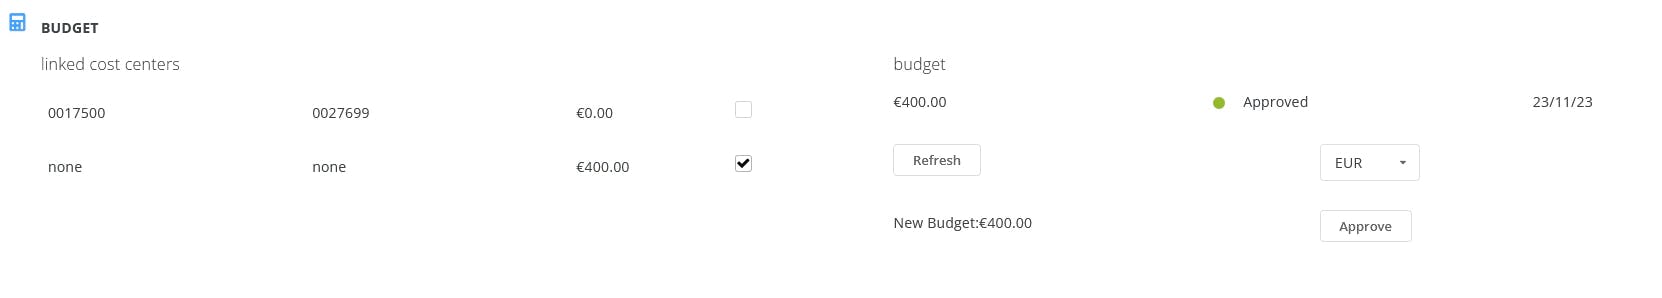 Project budget section with approved budget